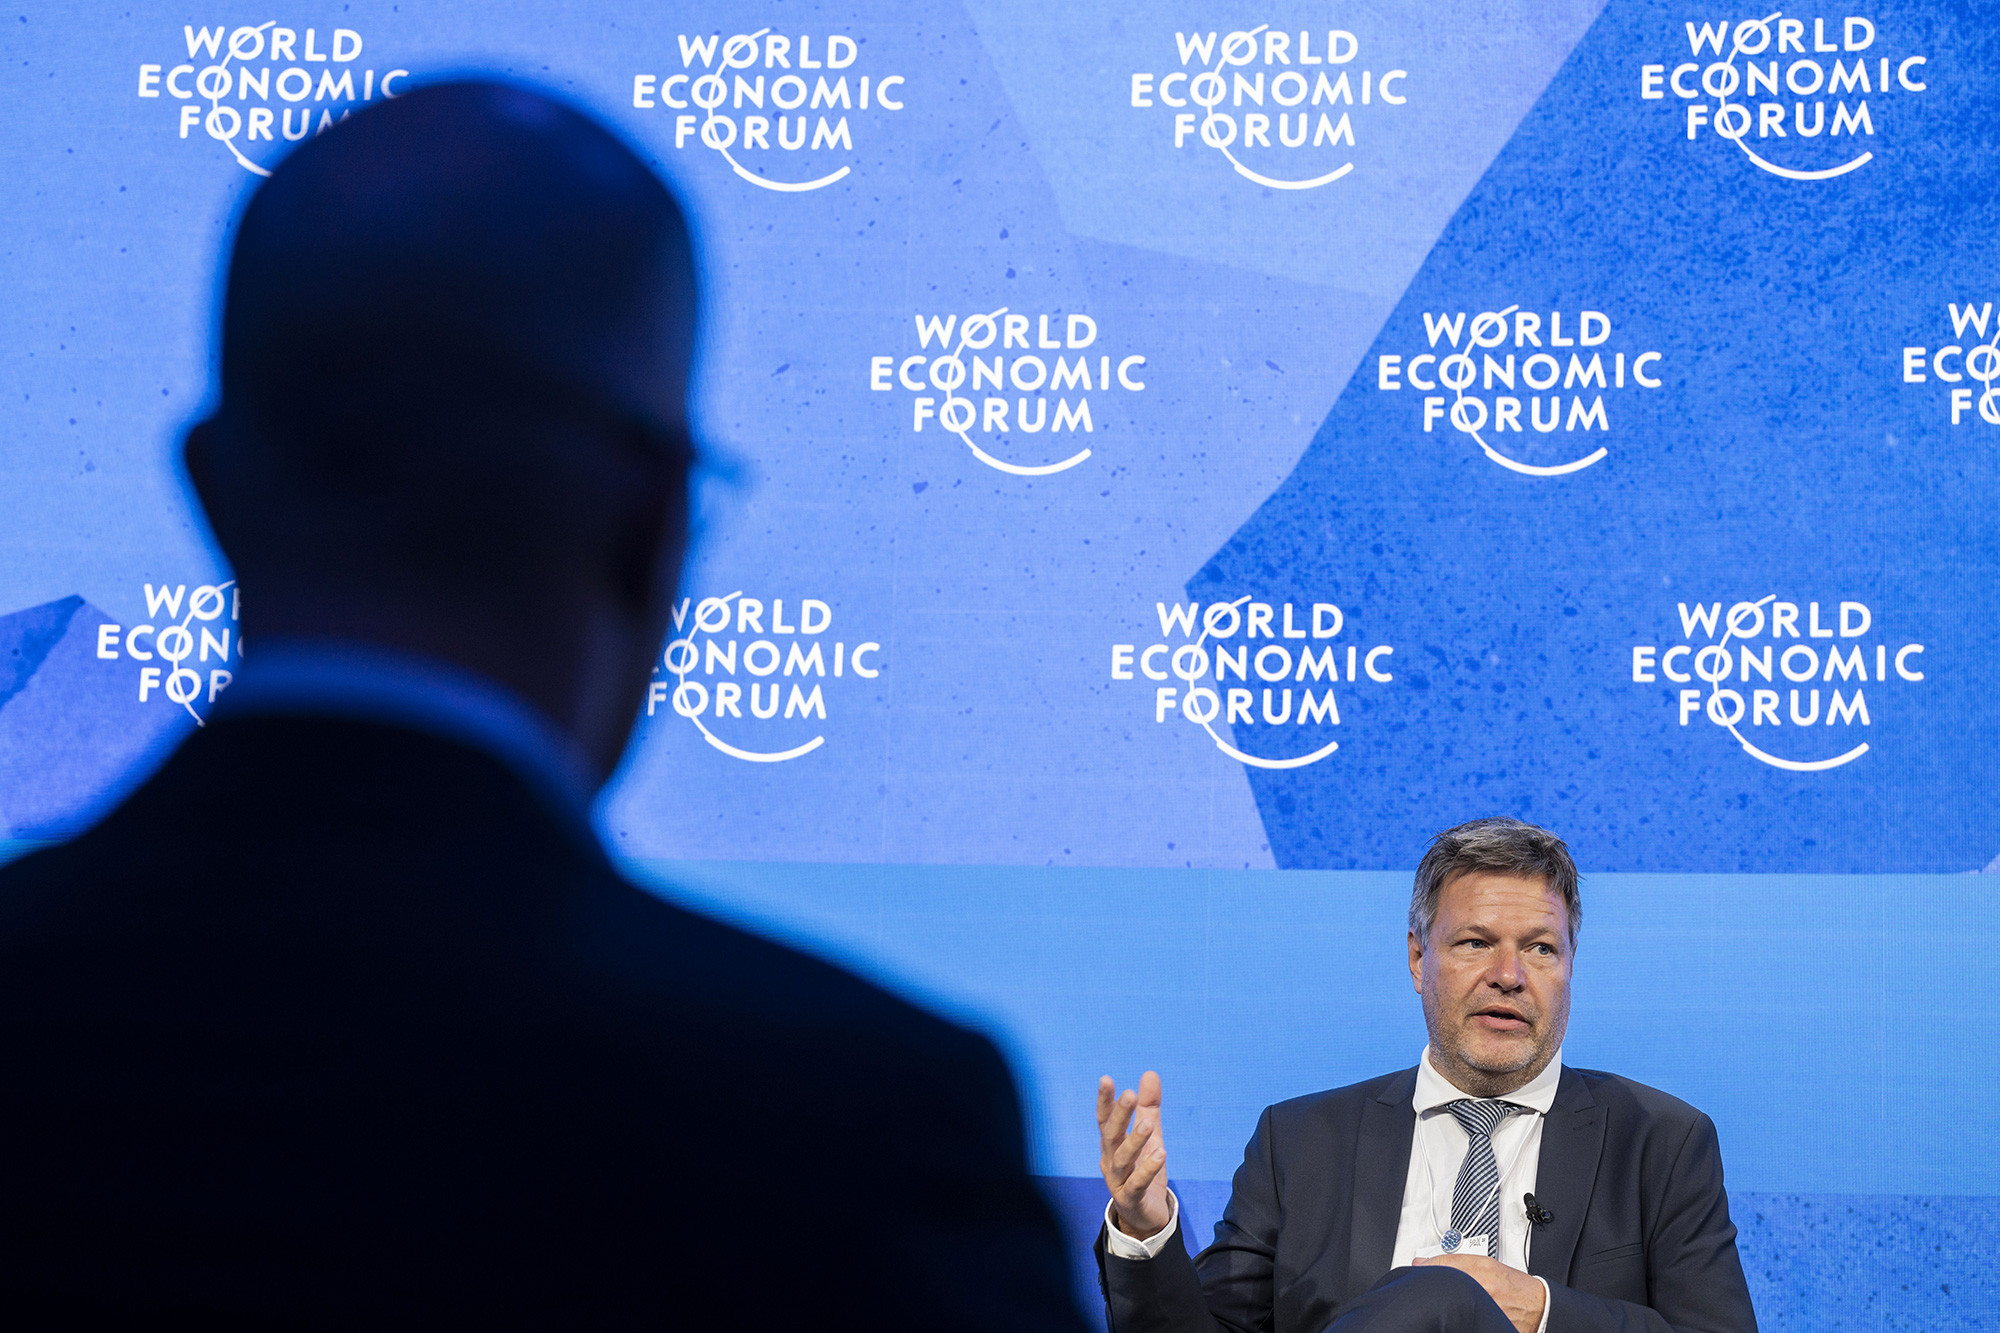 German Vice Chancellor and Federal Minister for Economic Affairs Robert Habeck addresses a panel session during the 51st annual meeting of the World Economic Forum in Davos, Switzerland, on May 23.